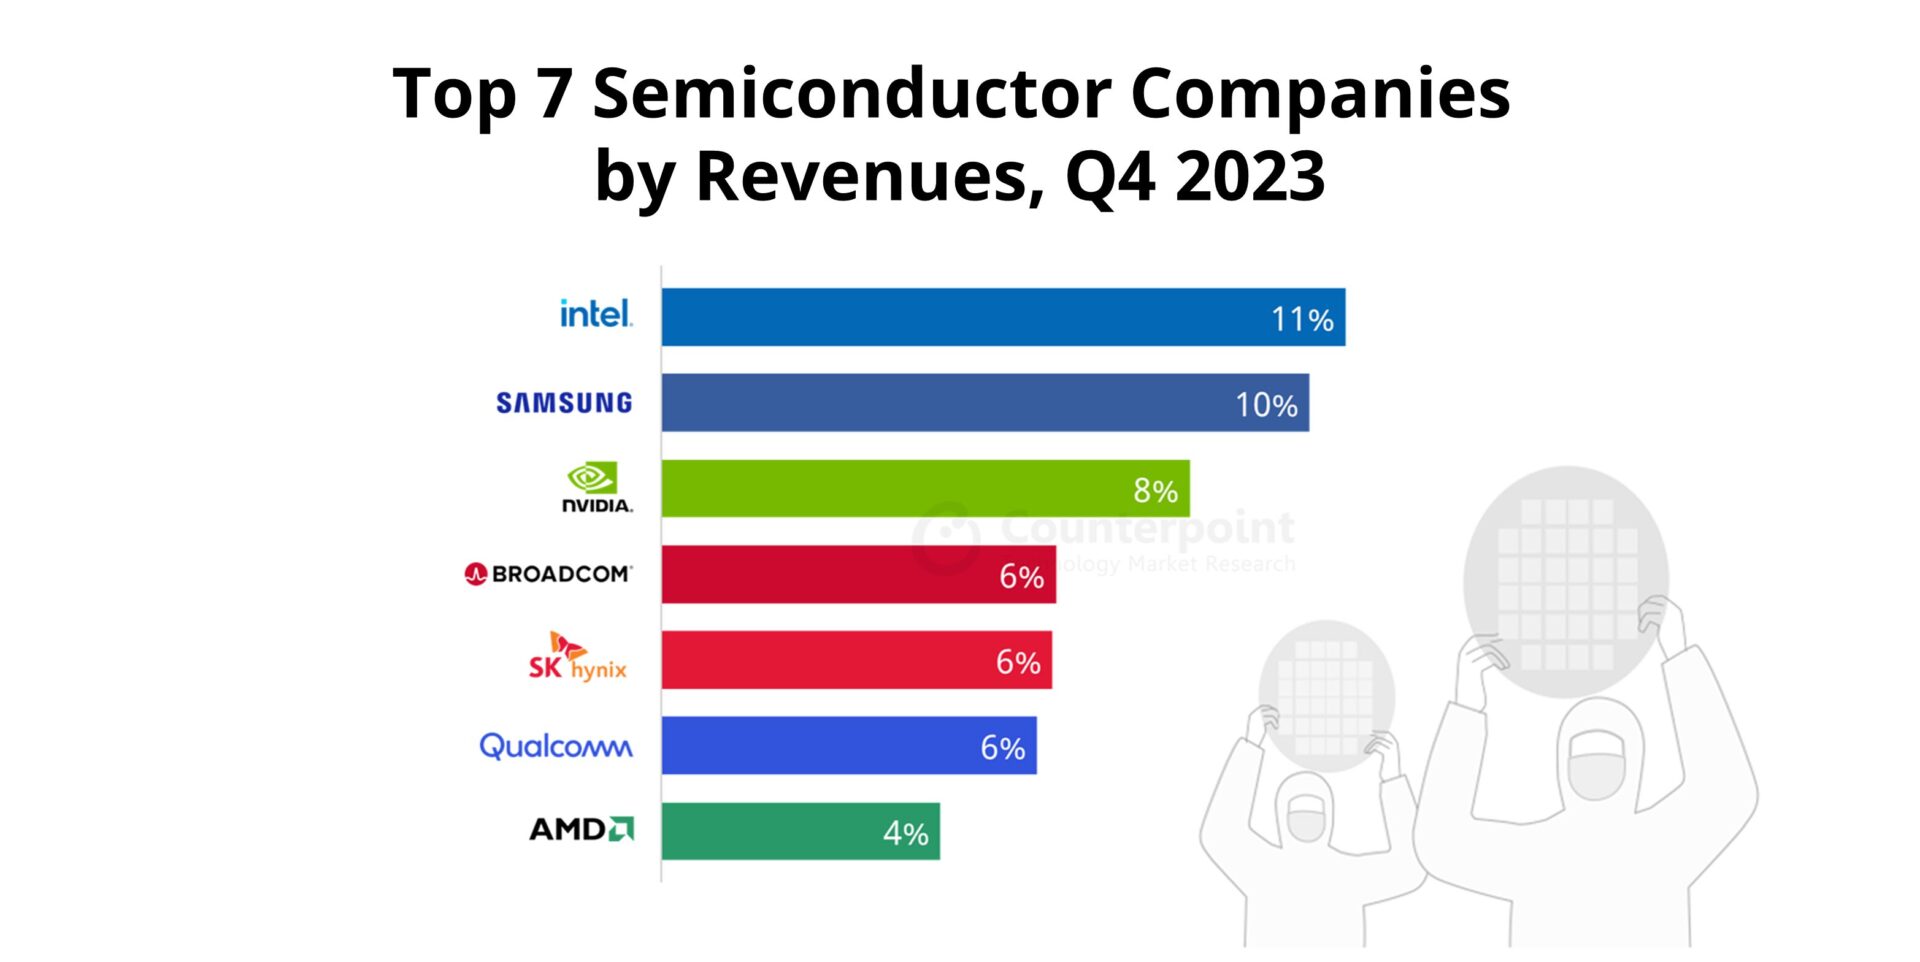 Top 7 semiconductor companies by revenues, Q4 2023